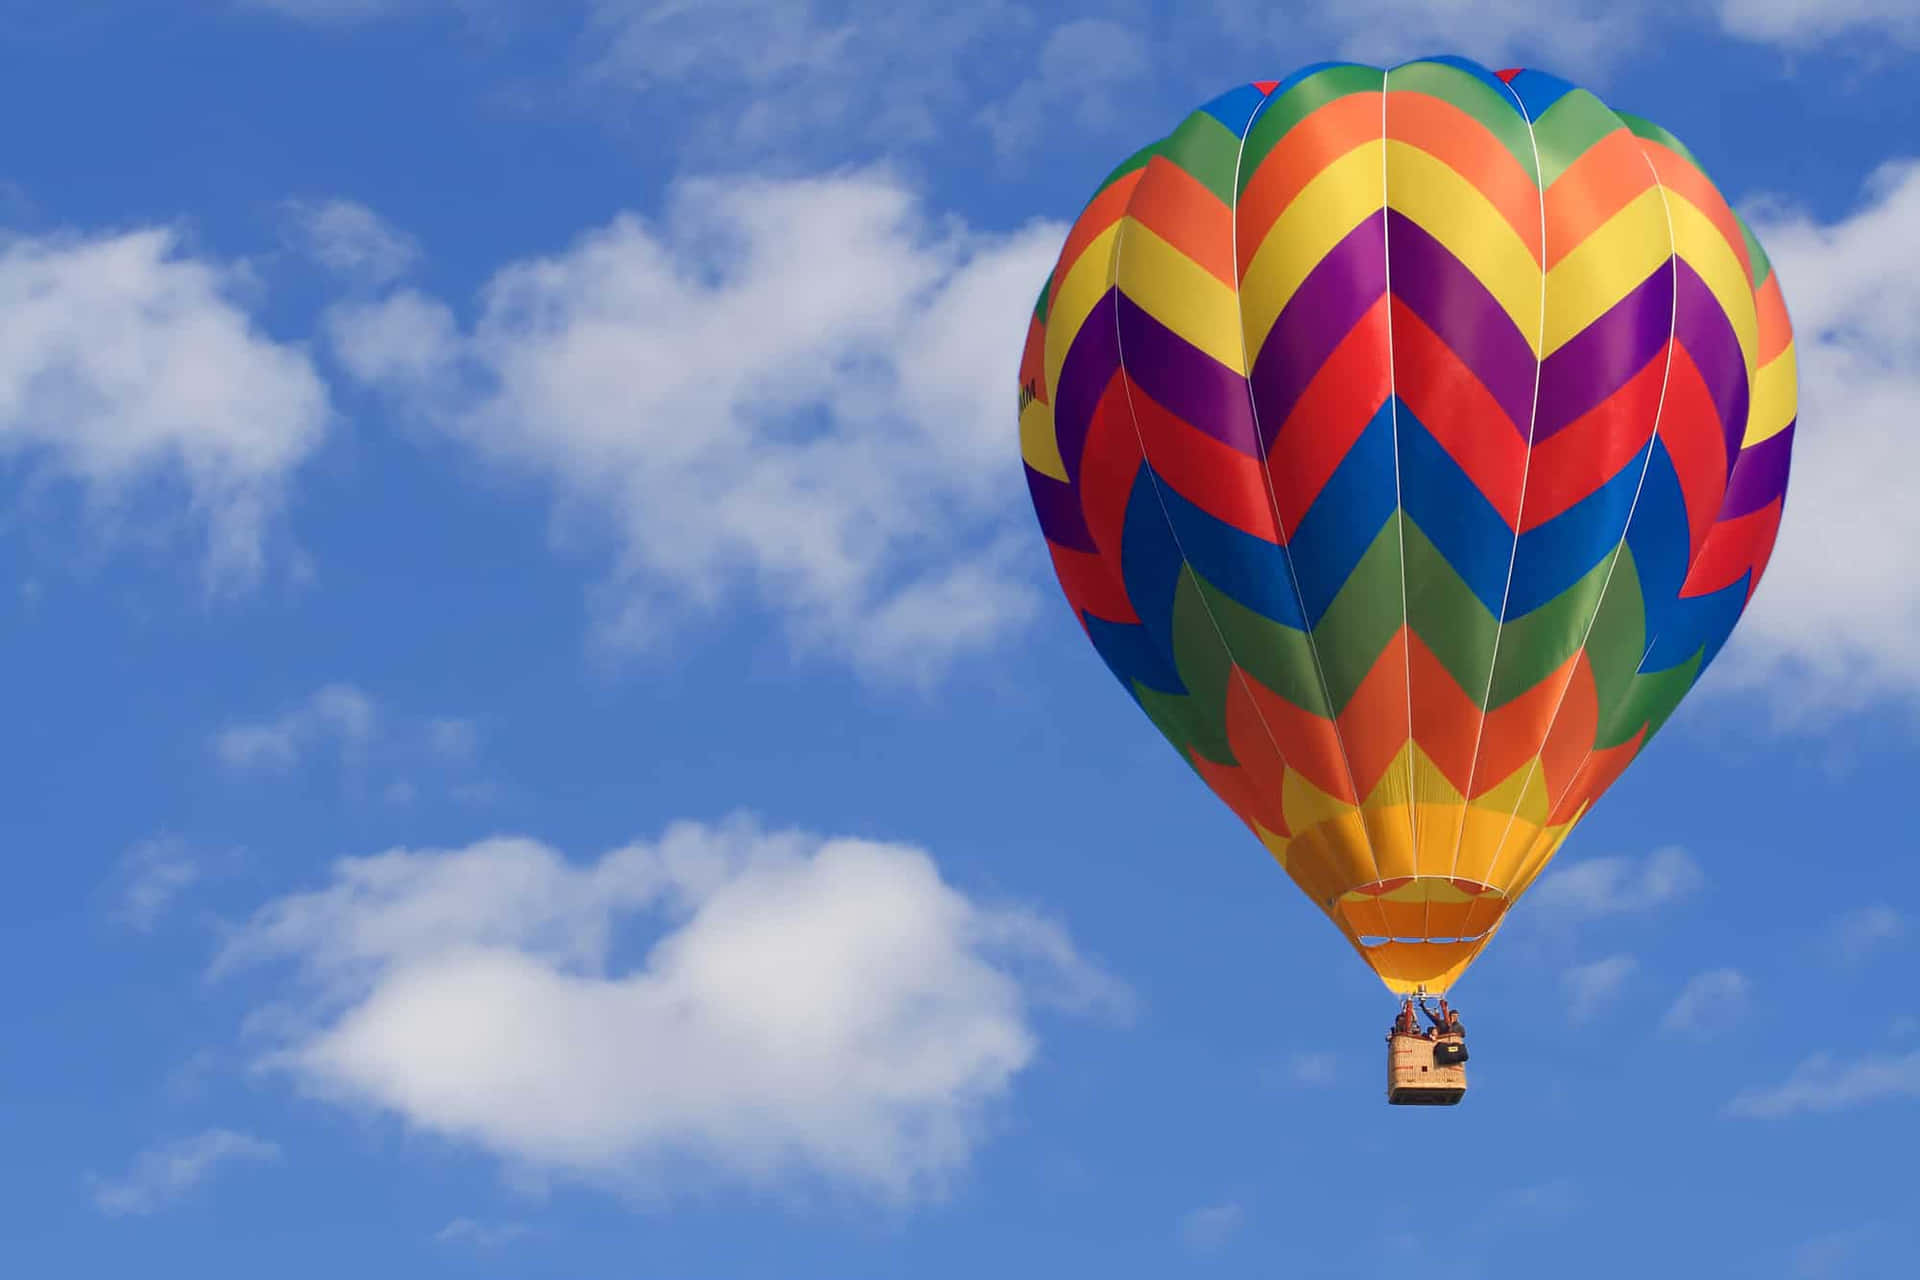 A Colorful Hot Air Balloon Flying In The Sky